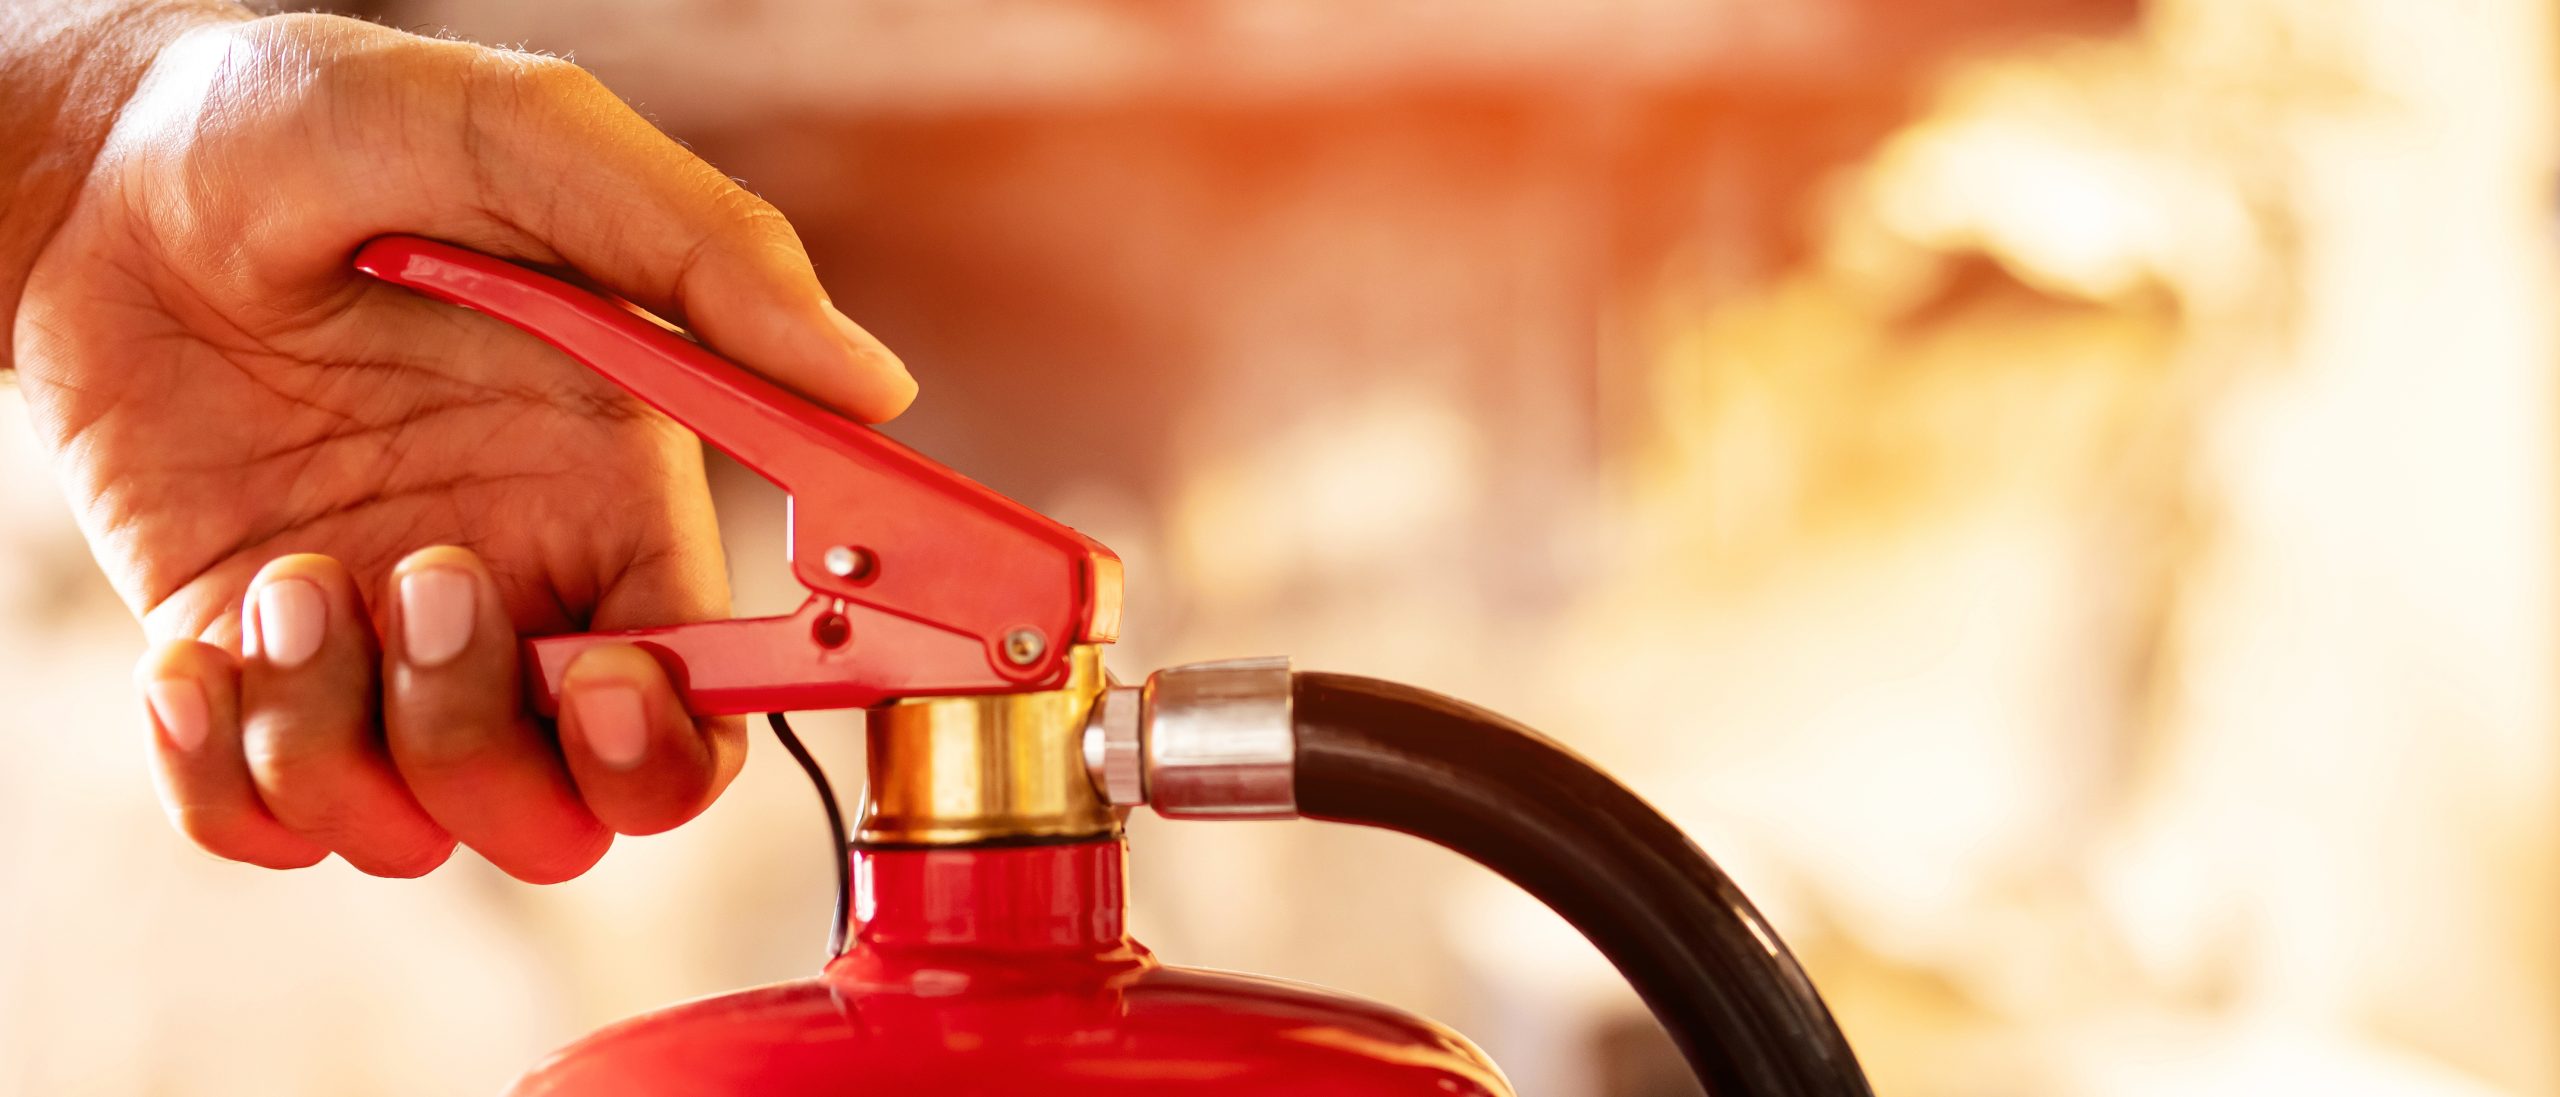 What are the requirements for fire safety during construction and renovation projects?